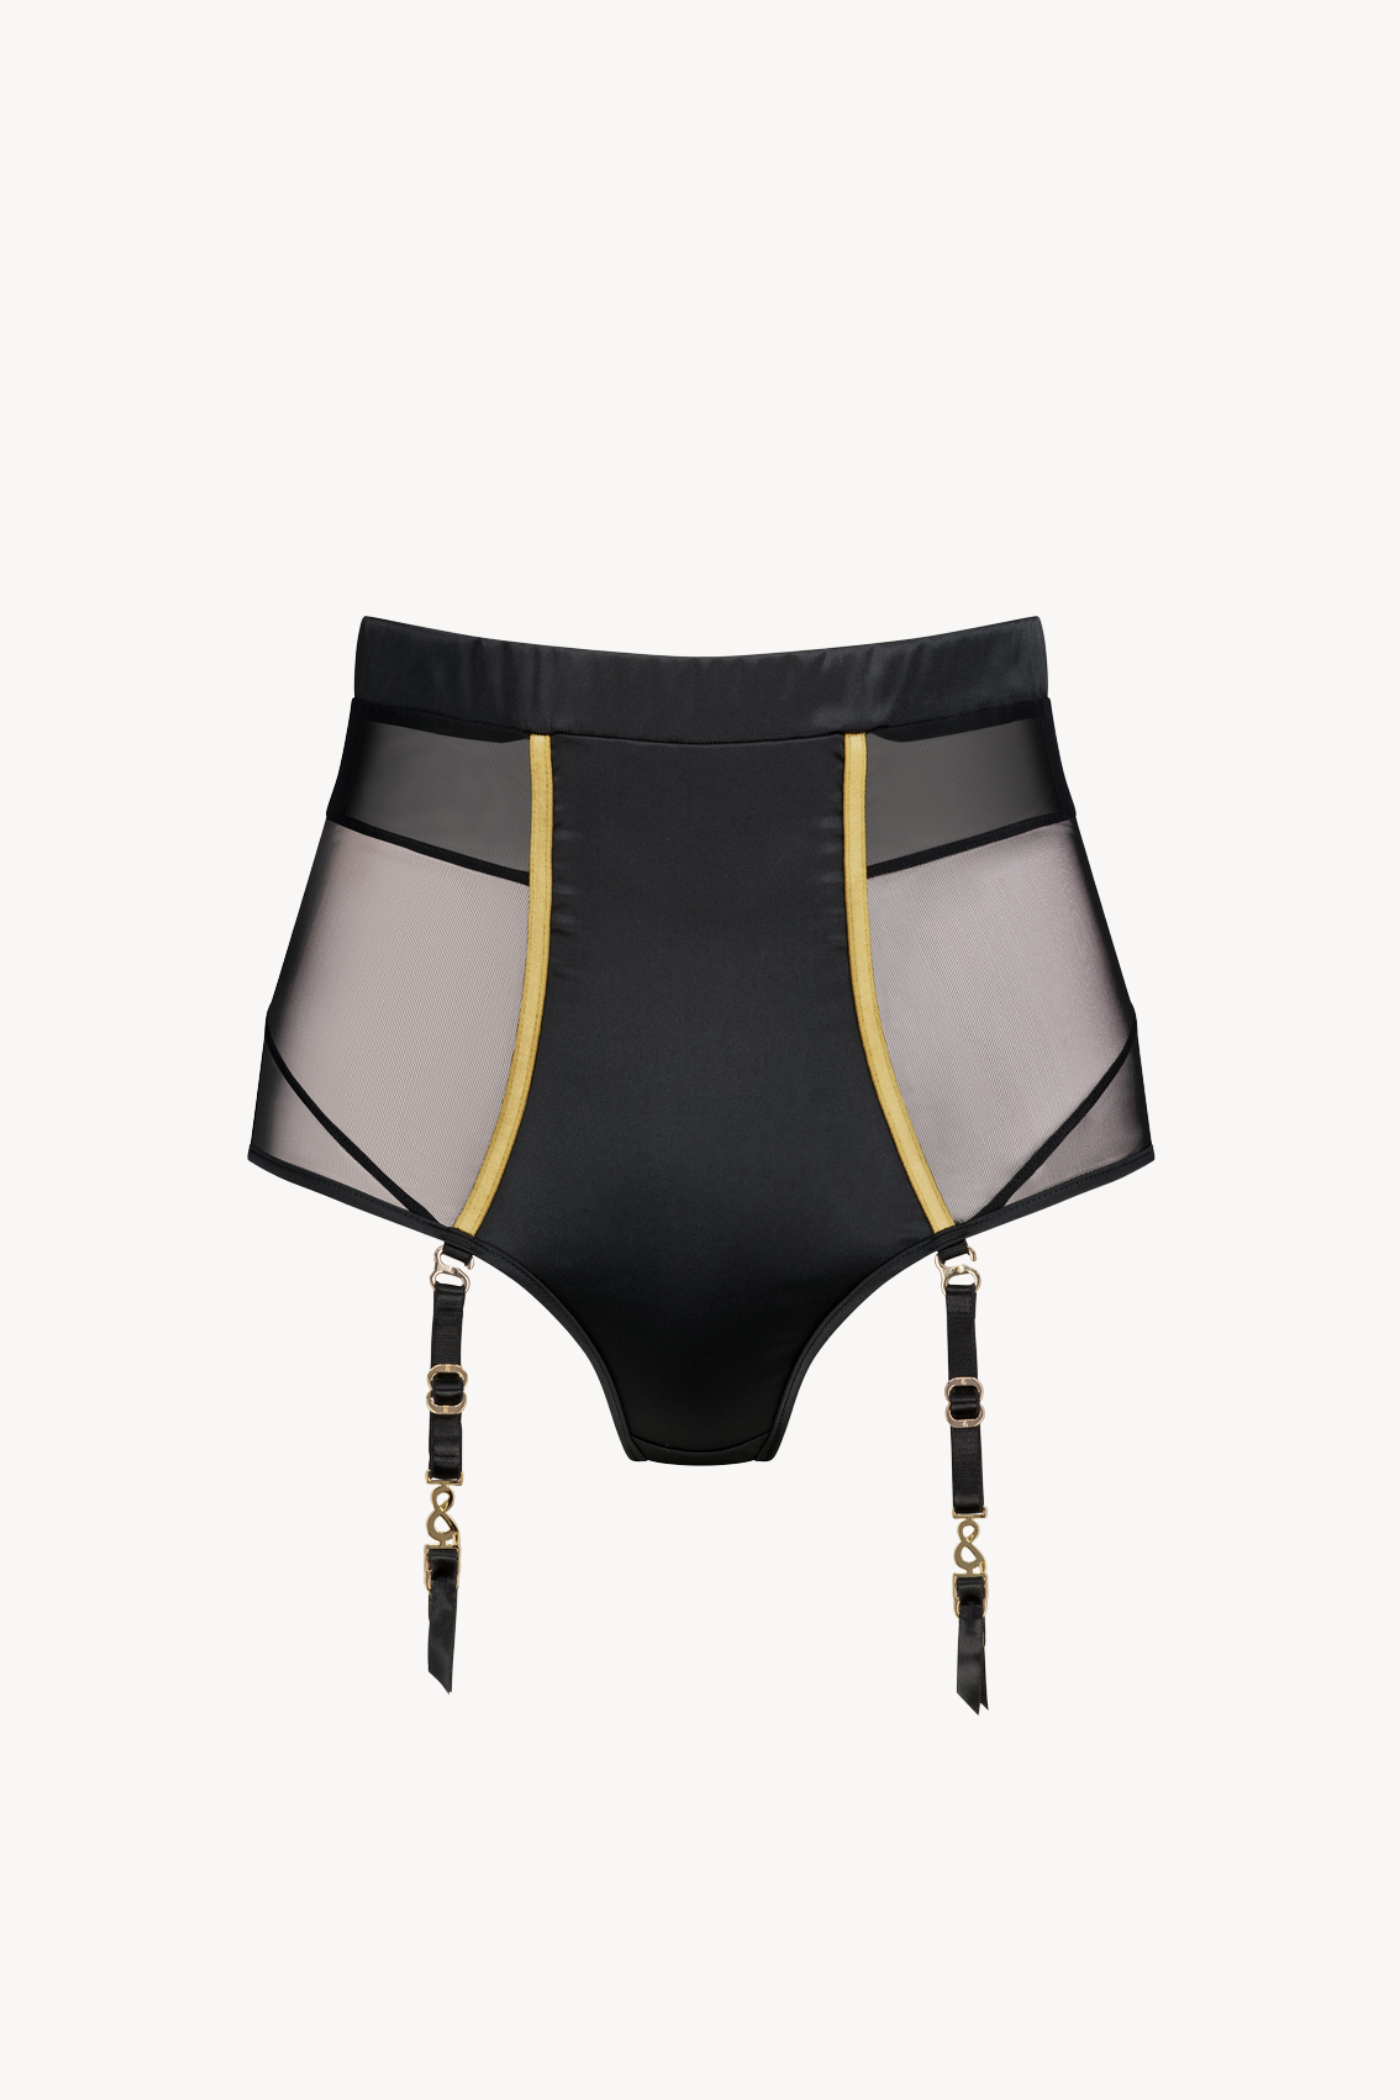 BOLD High Waisted Brief with Detachable Suspenders